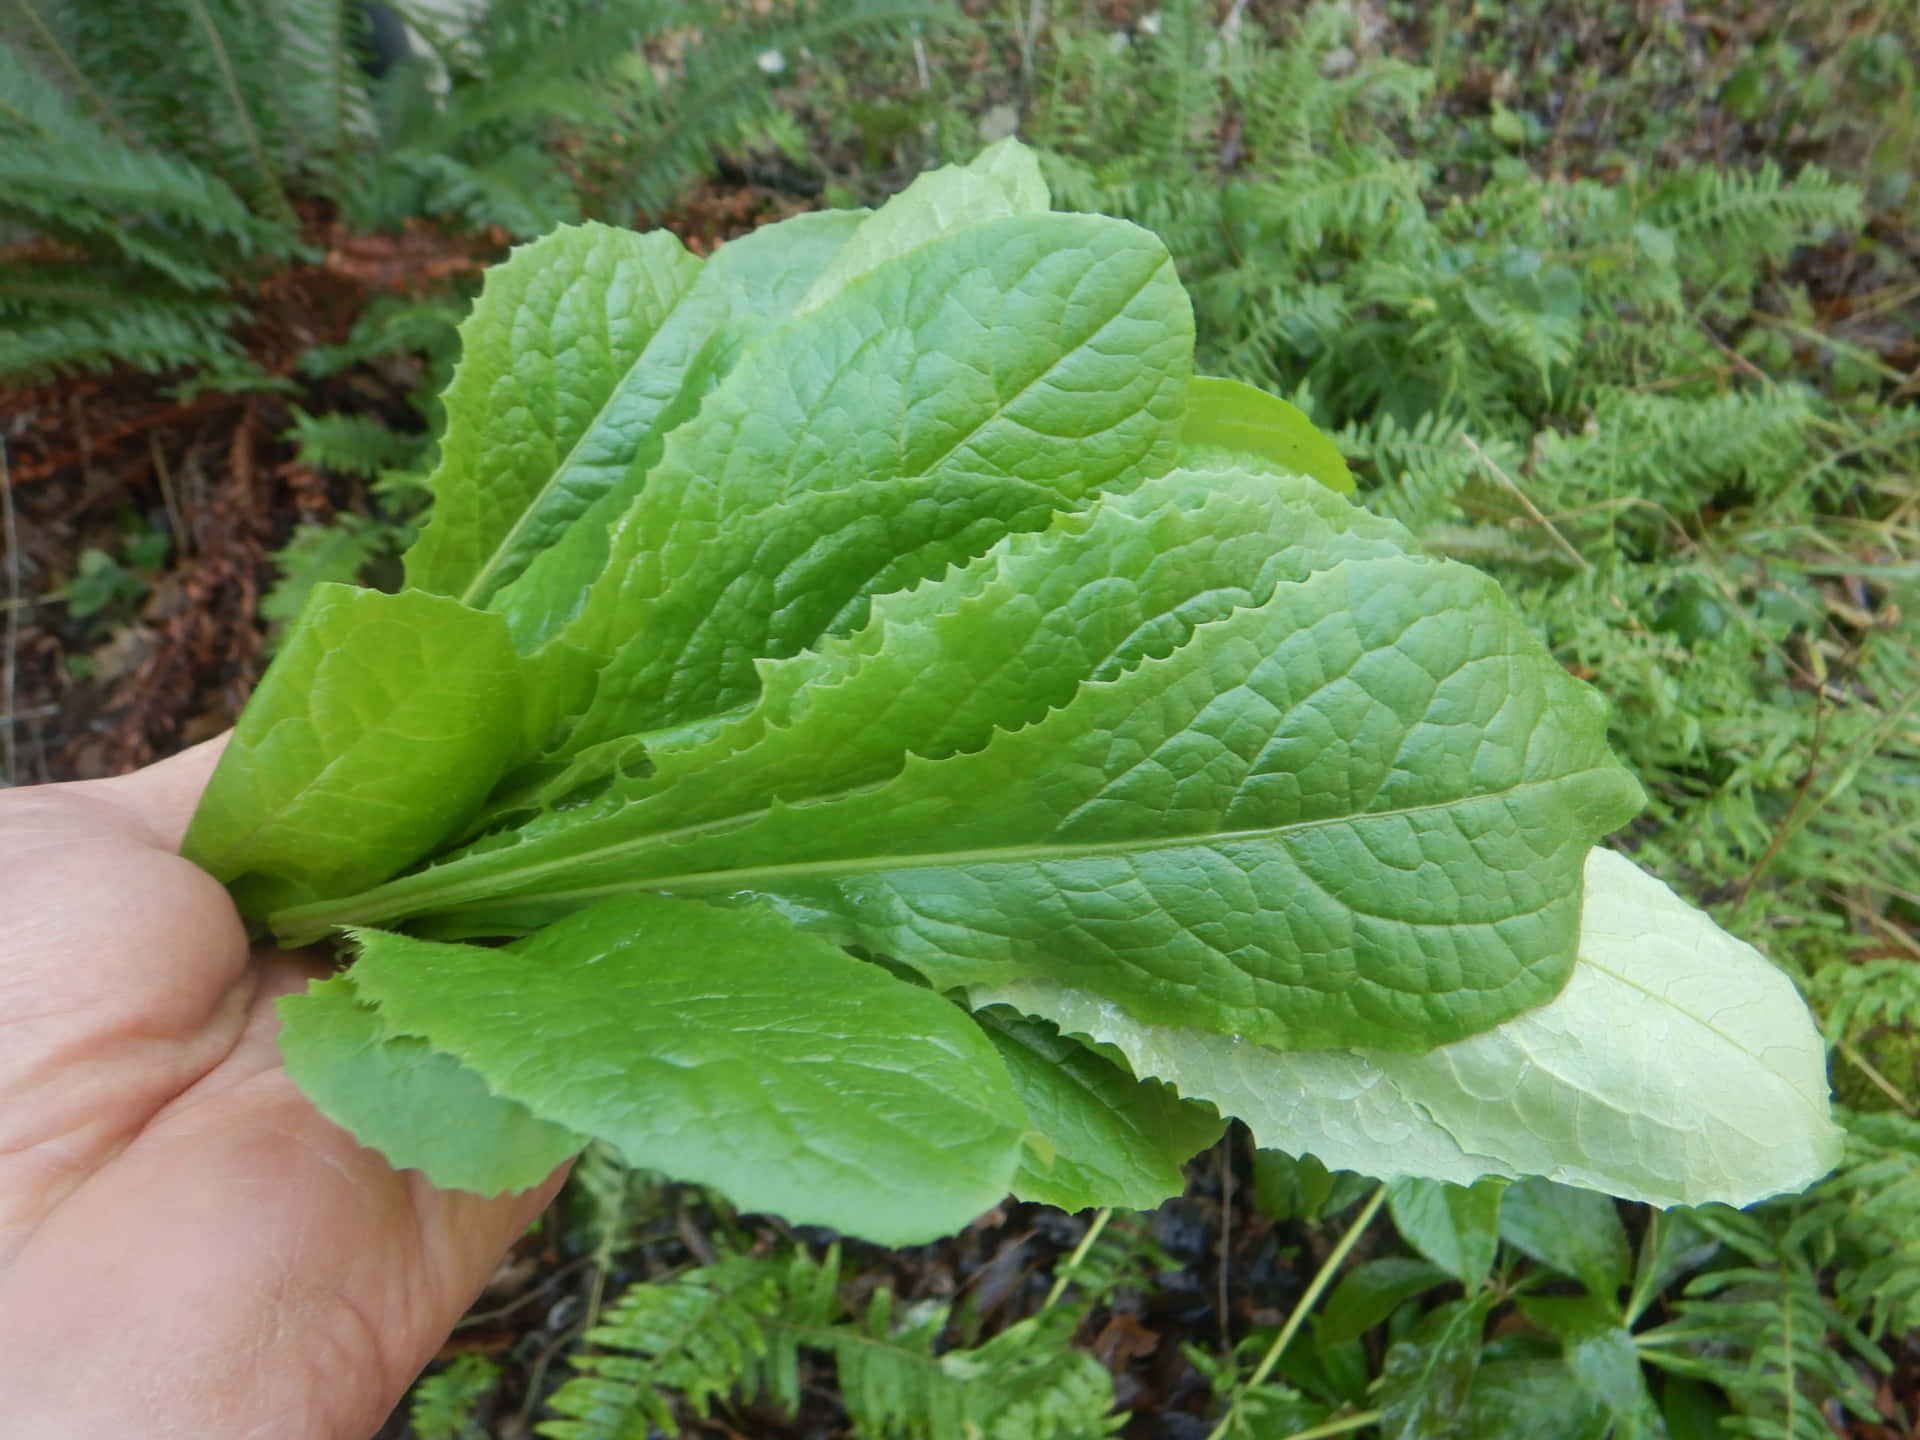 The Wild Lettuce Plant in Nature